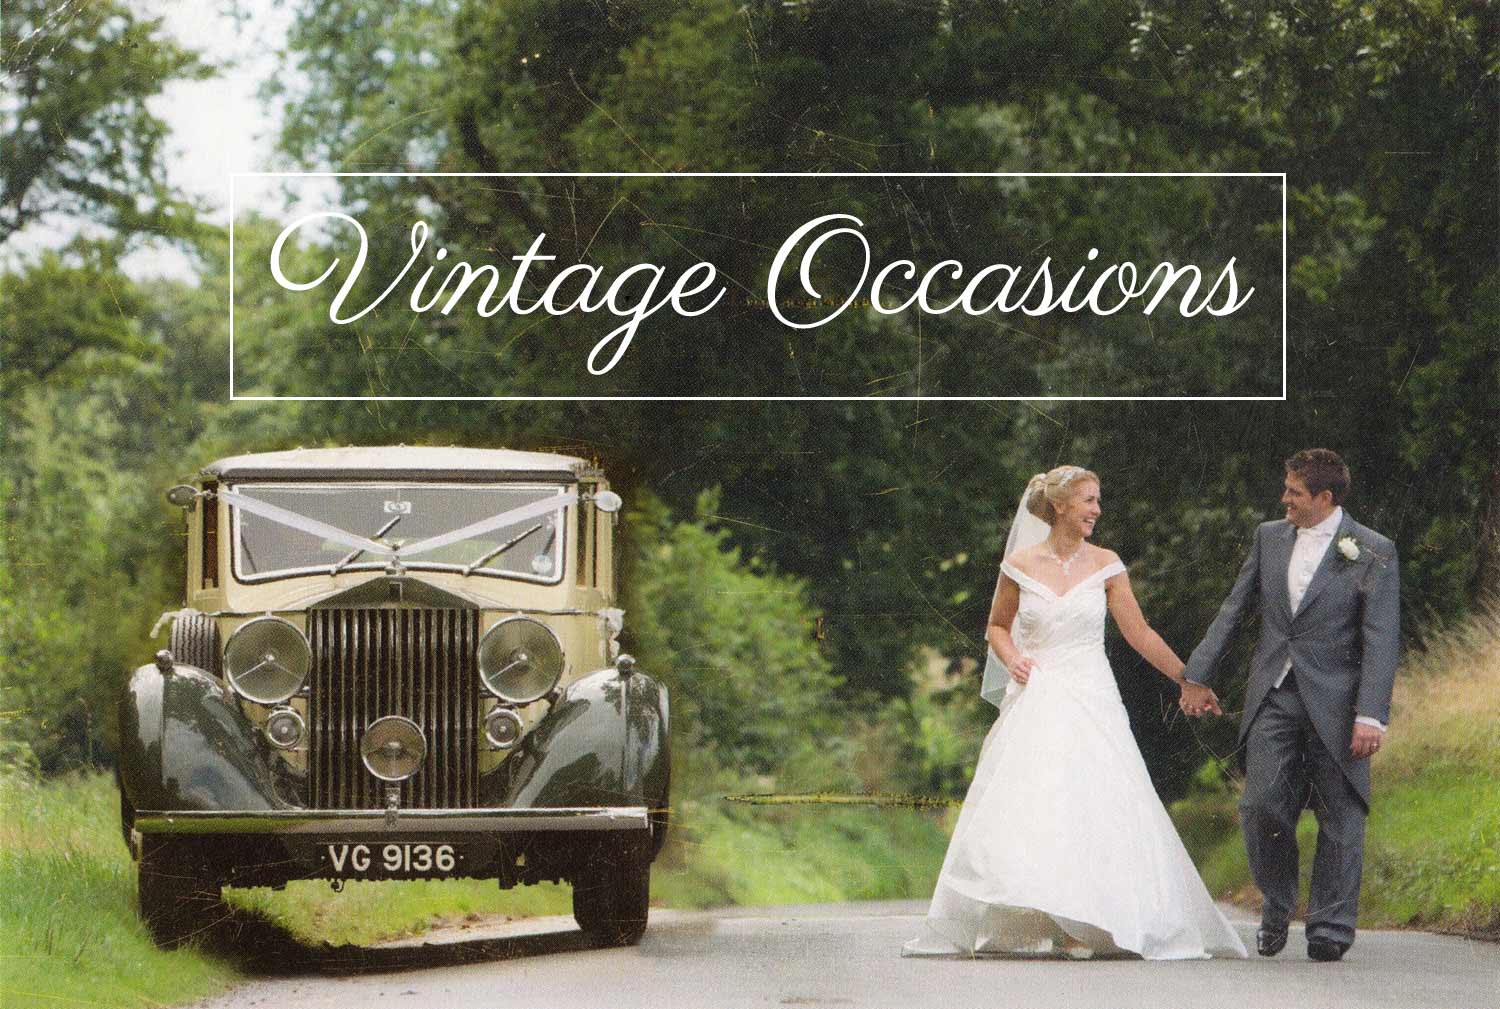 Vintage Occasions Wedding Cars